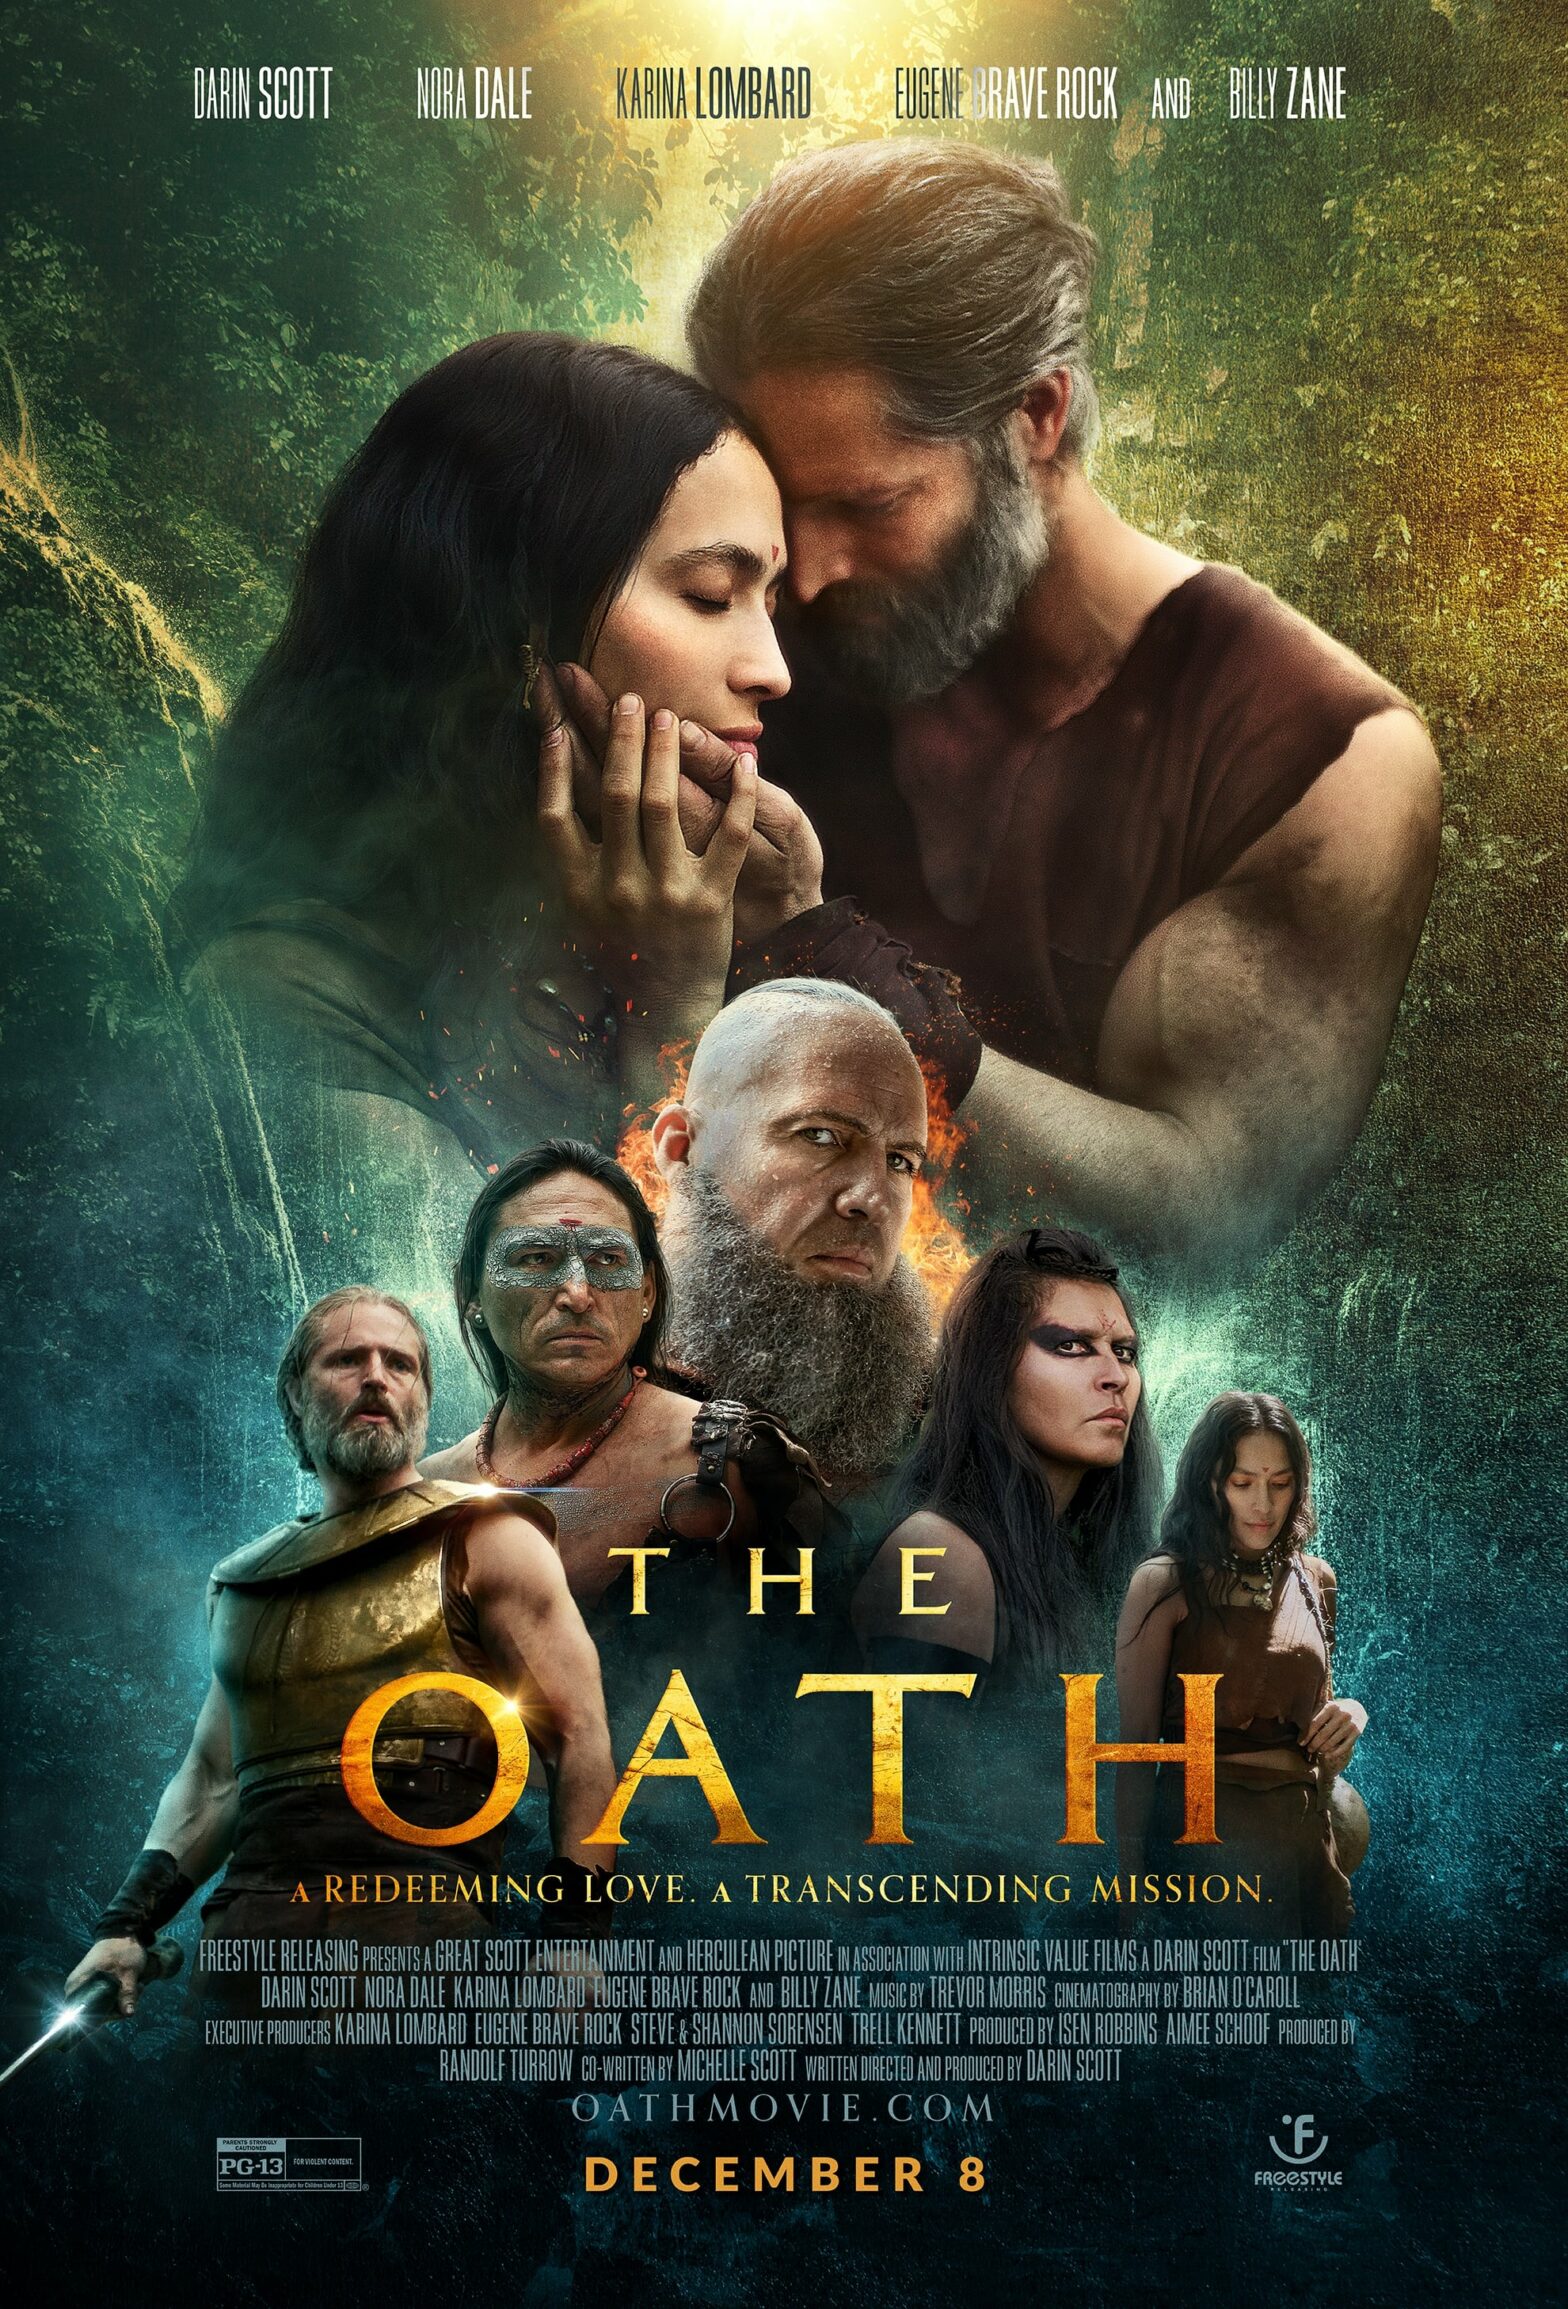 Poster for the movie "The Oath"